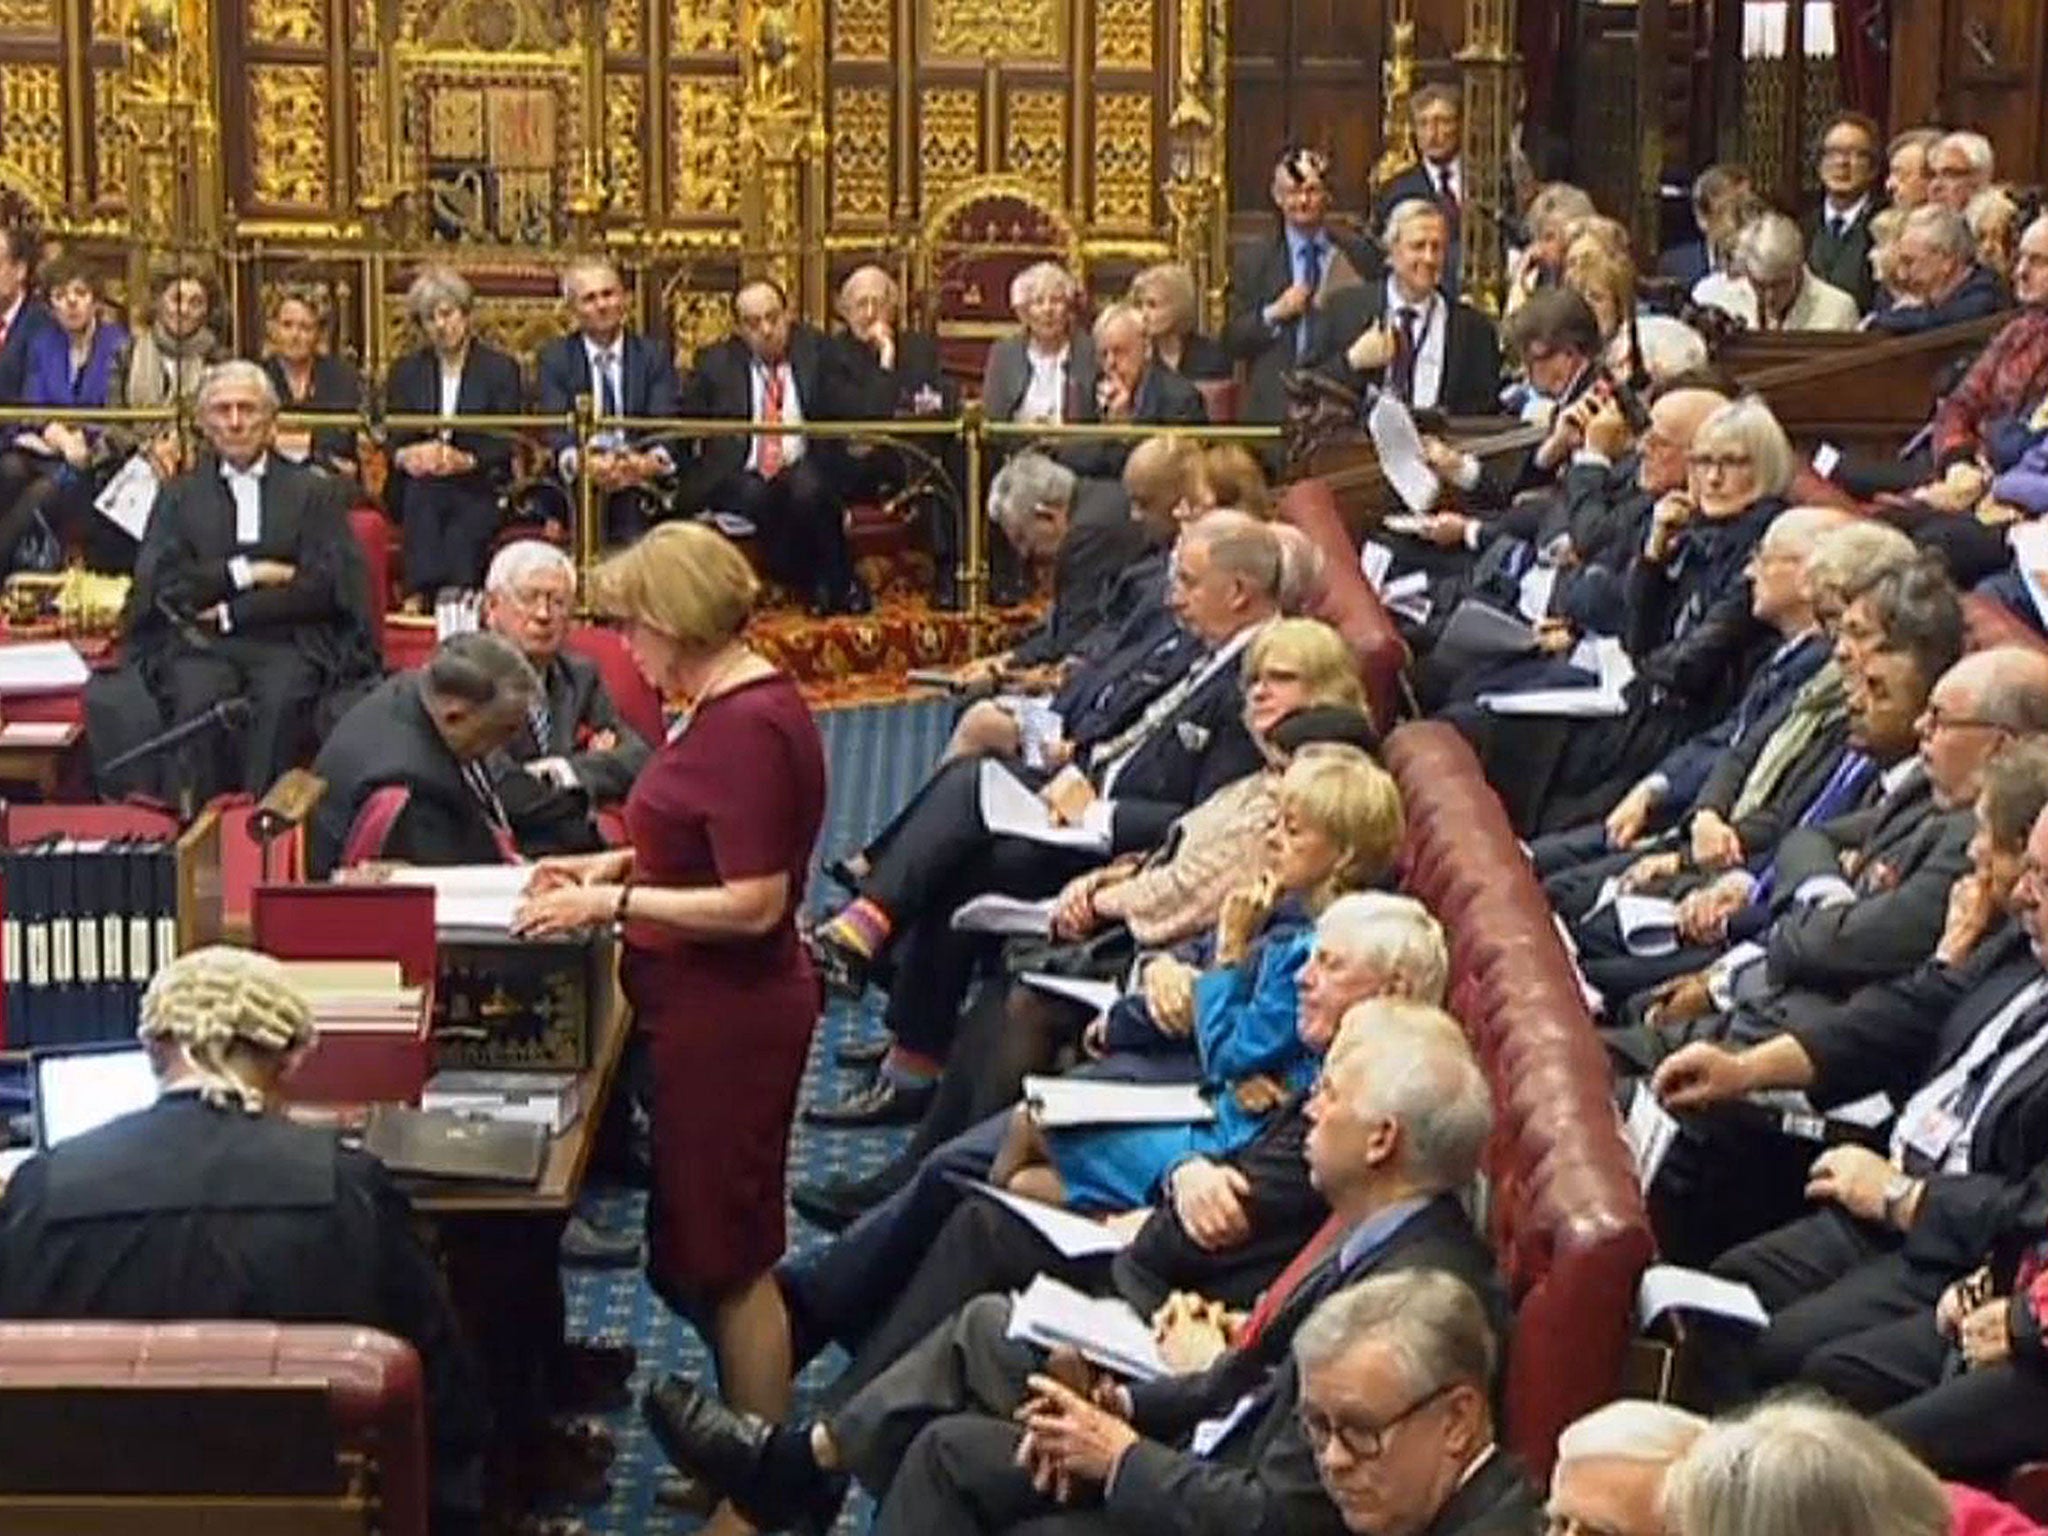 Theresa May watches from the steps of the Queen’s golden throne, as the House of Lords debates the Brexit bill